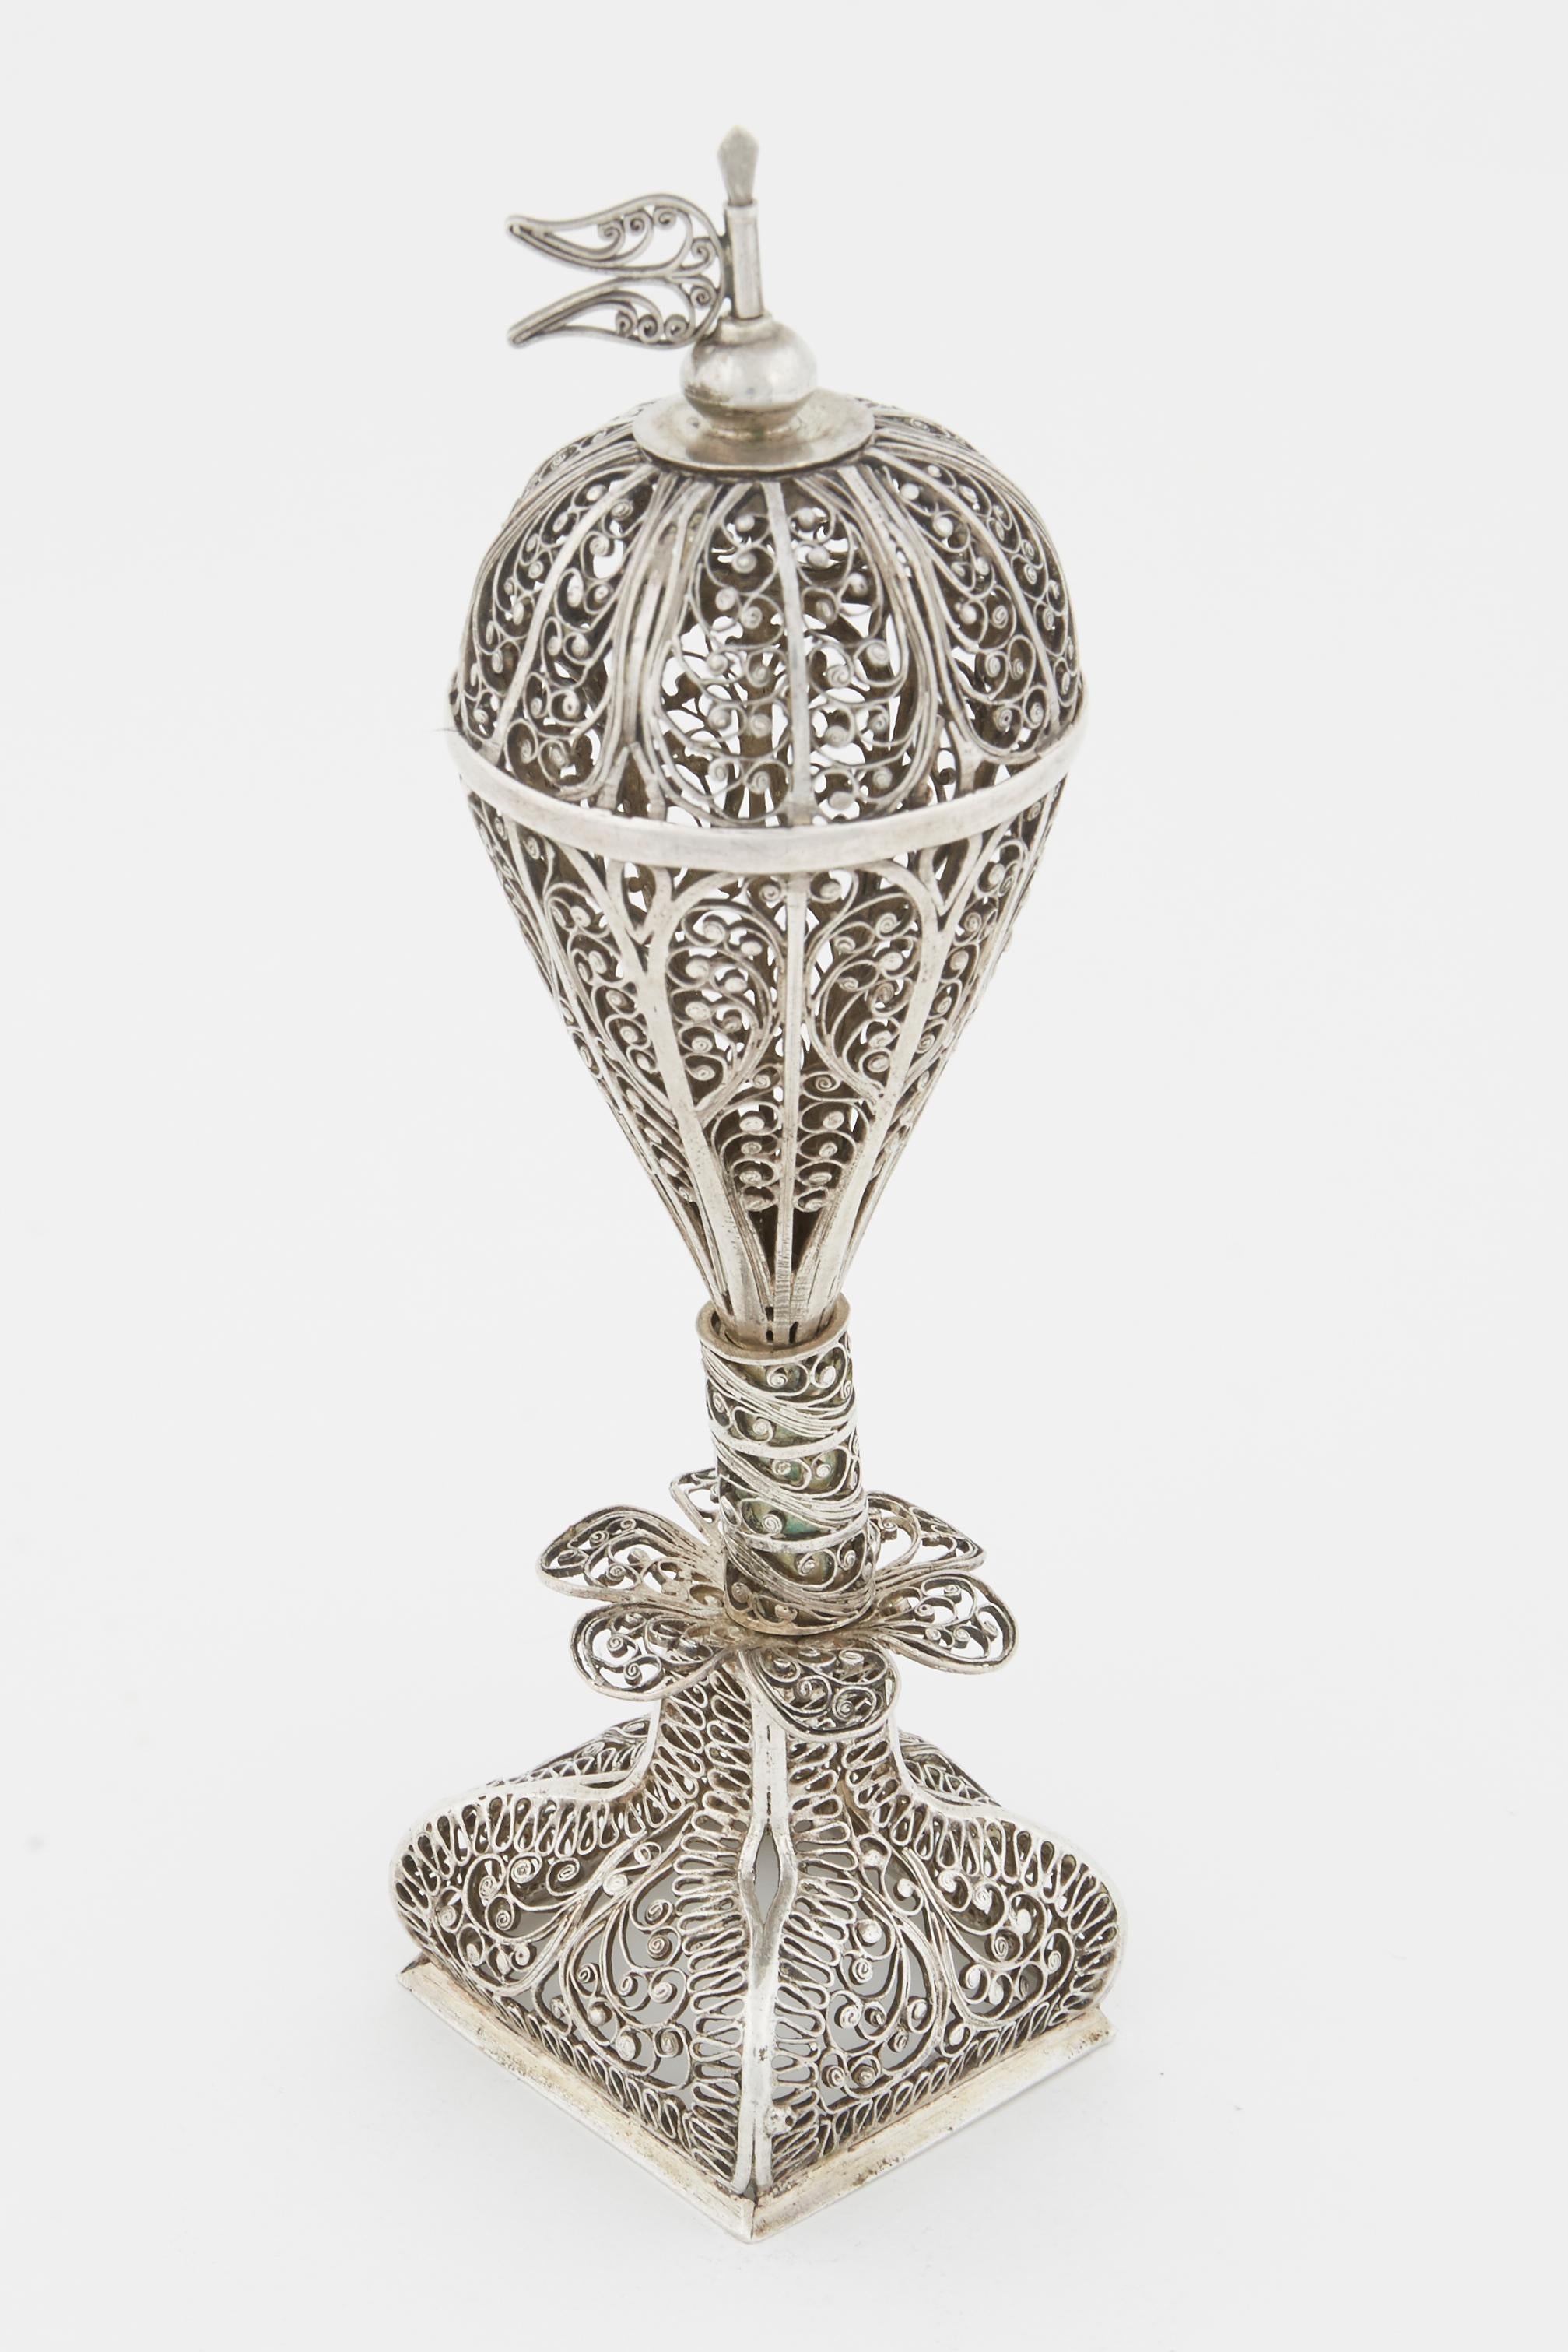 Handmade silver filigree spice tower, Zhytomyr, Ukraine, 19th century.
On a square filigree base. The stem is decorated with six petals that connect to pomander shaped upper portion and topped with filigree flag.
Marked with 